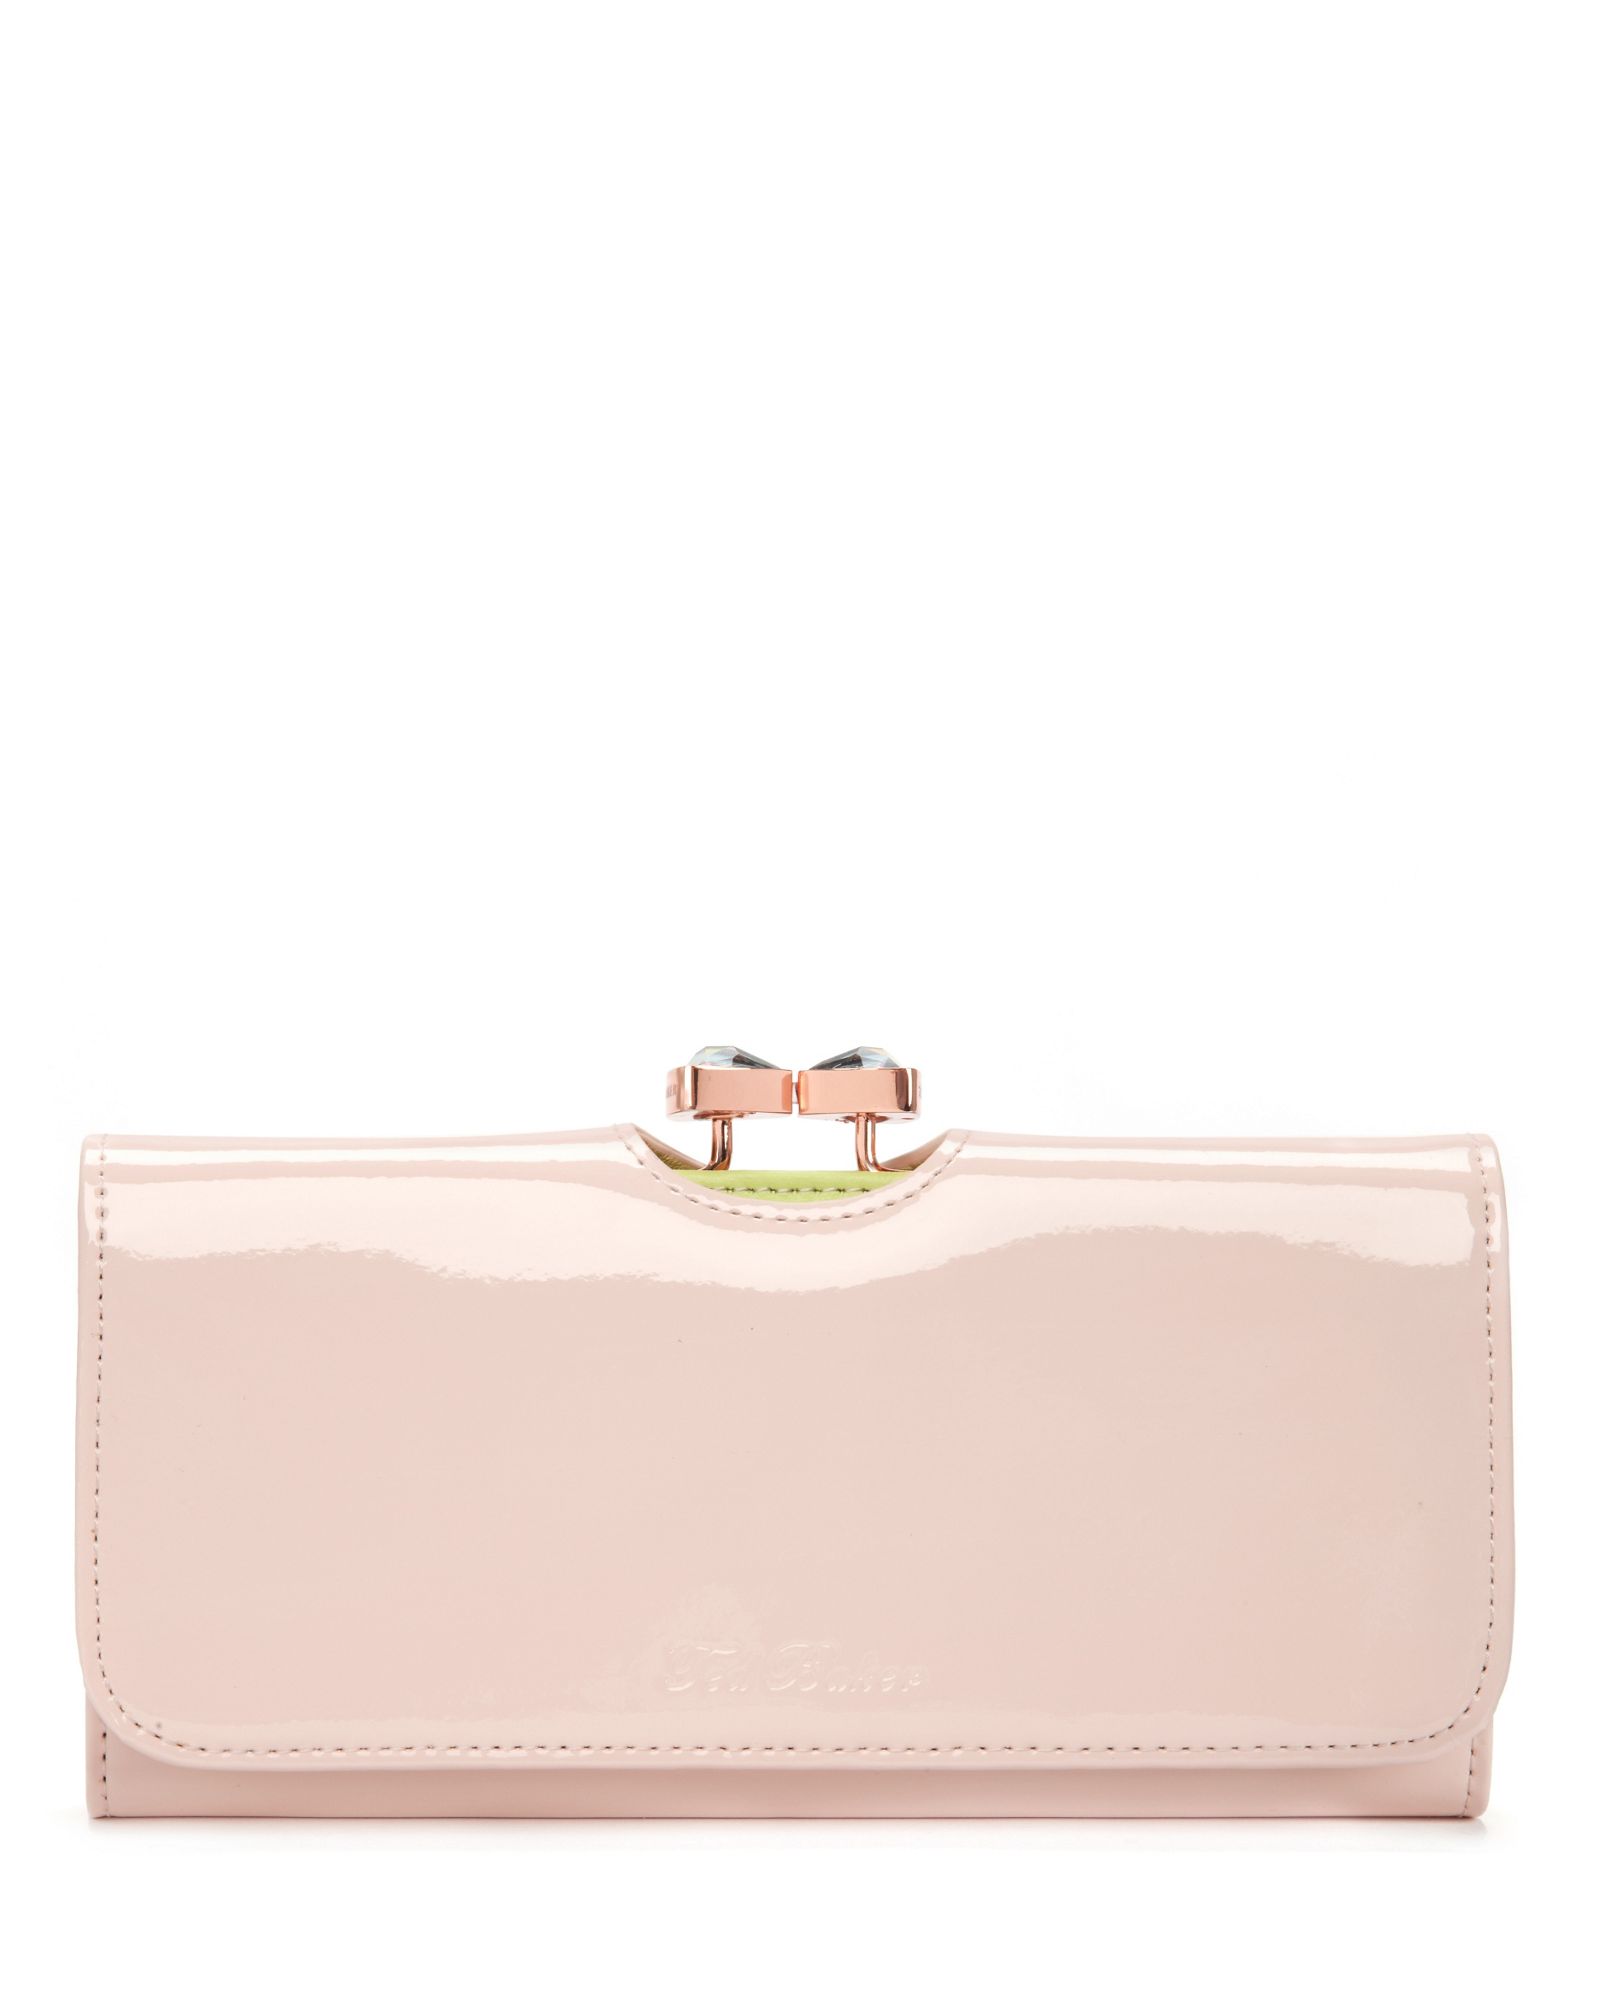 Ted Baker Titiana Patent Matinee Purse in Pink (Light Pink) | Lyst